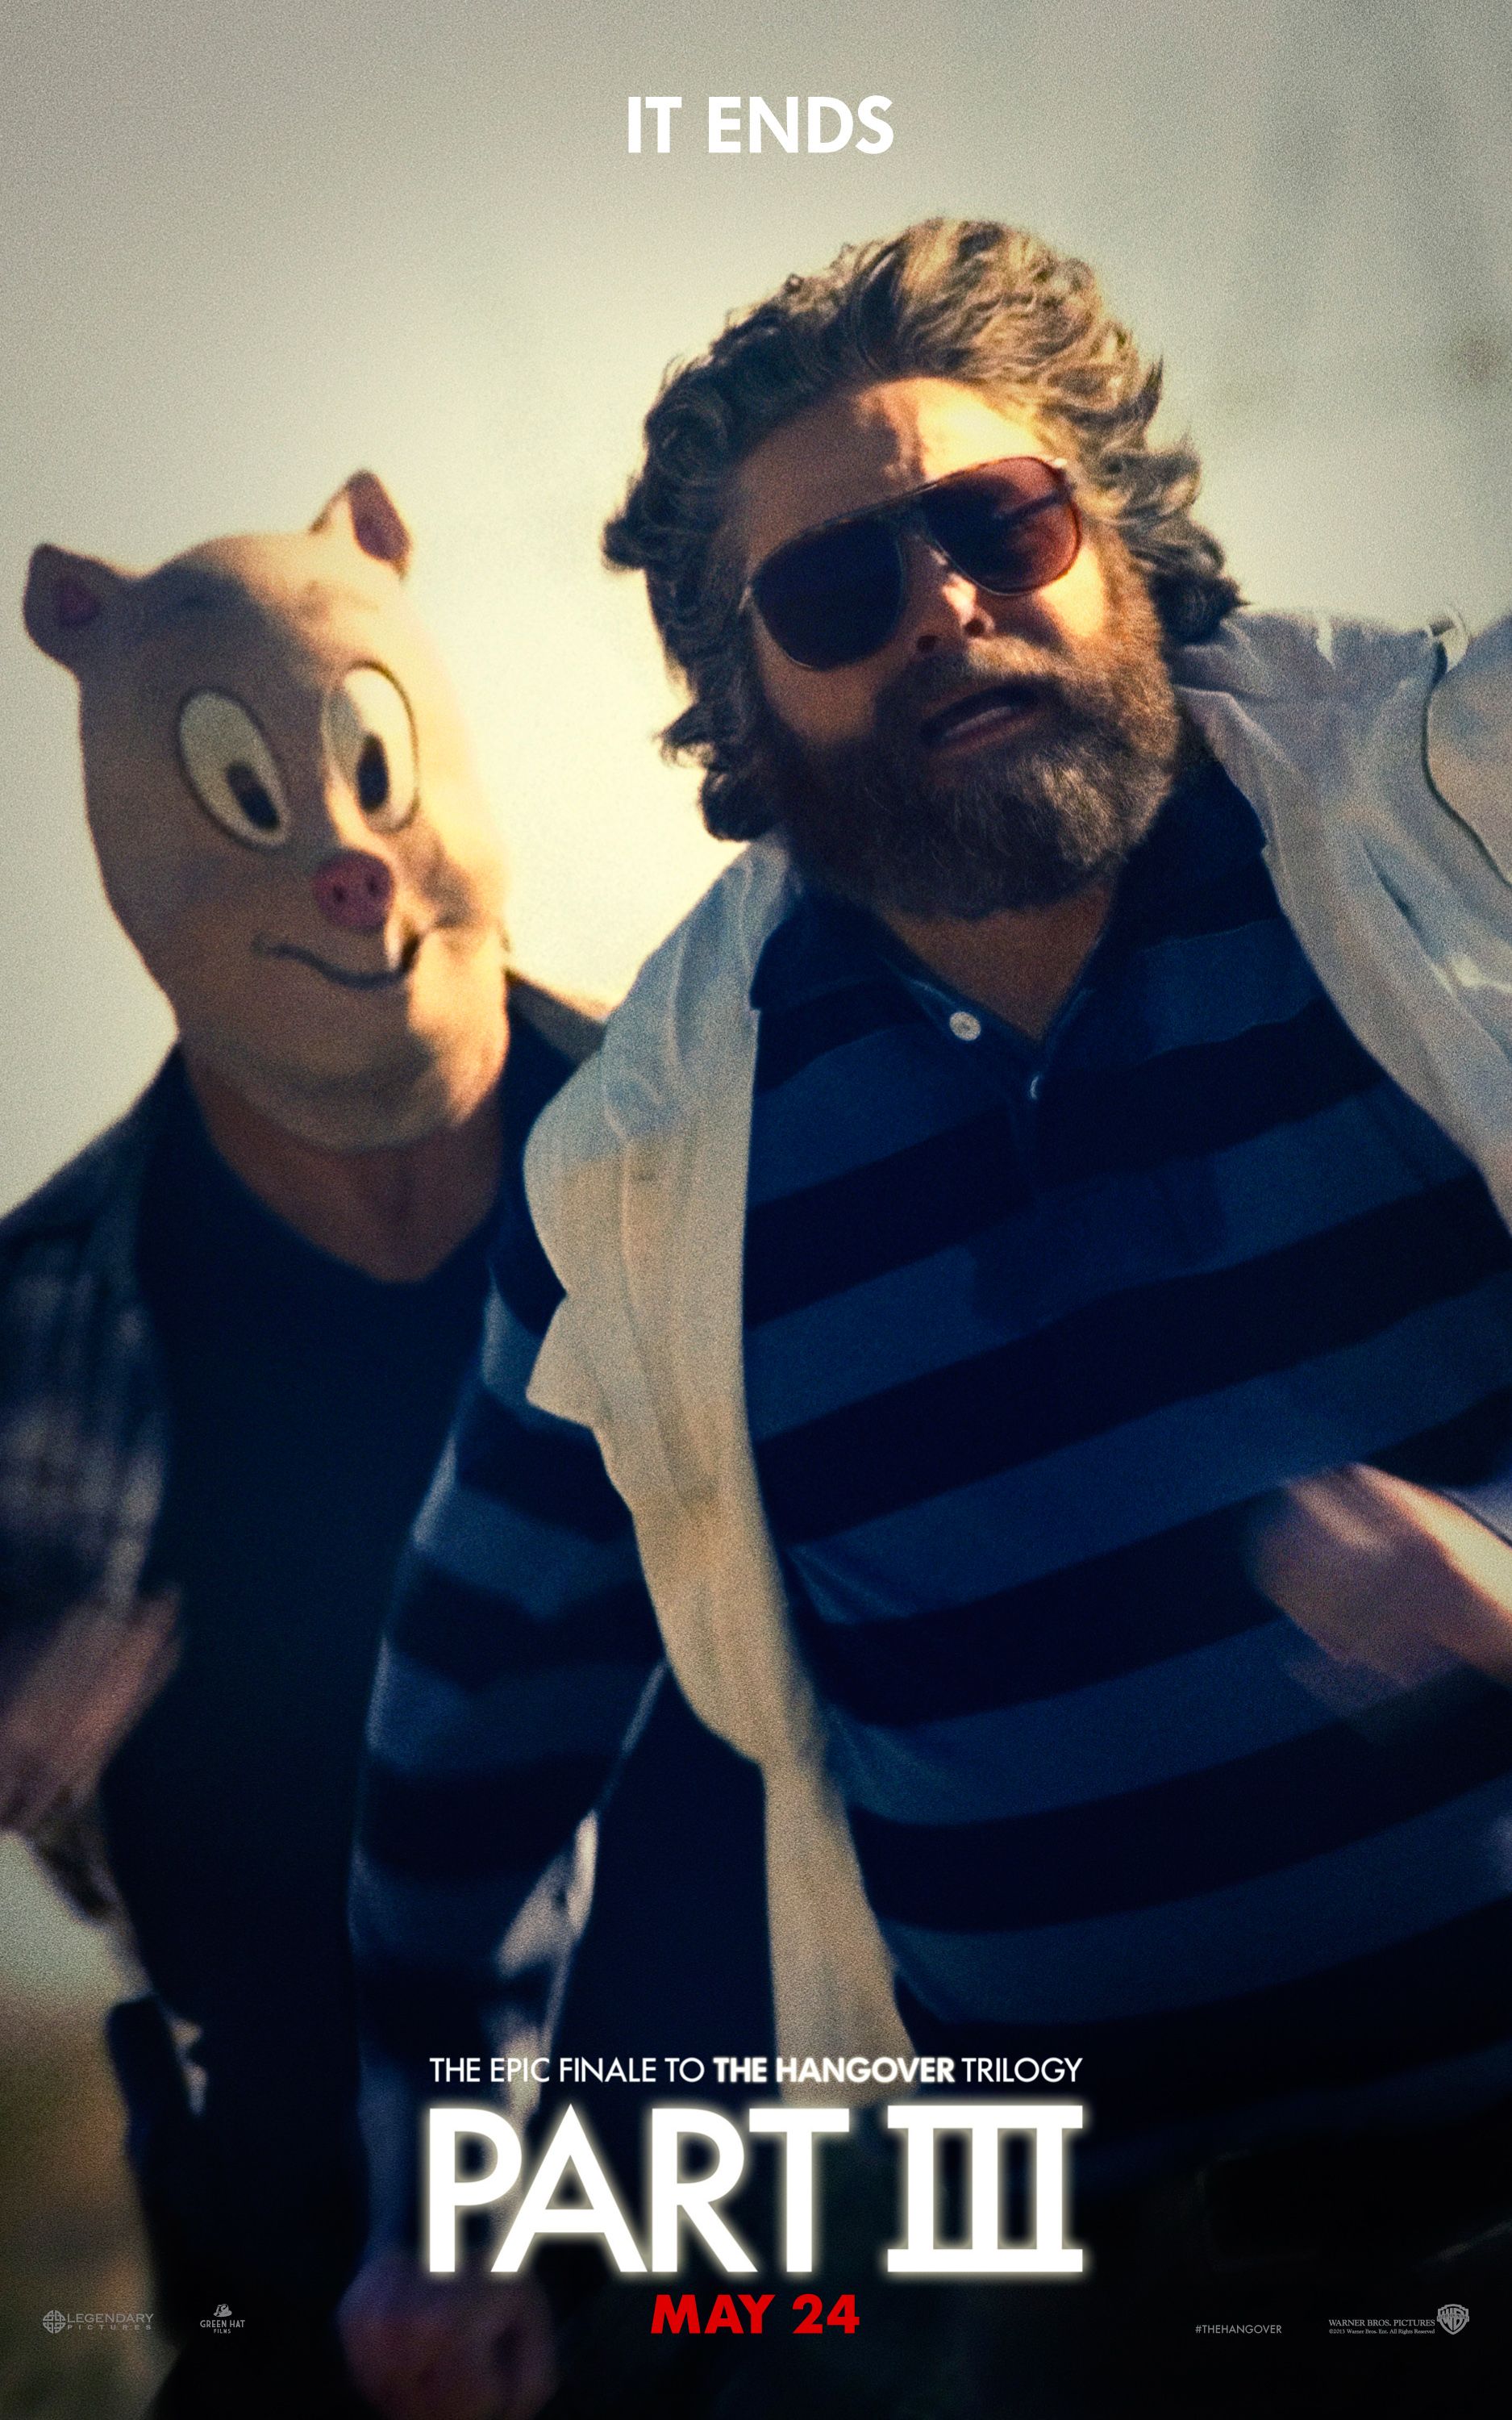 The Hangover Part III Poster with Zach Galifianakis